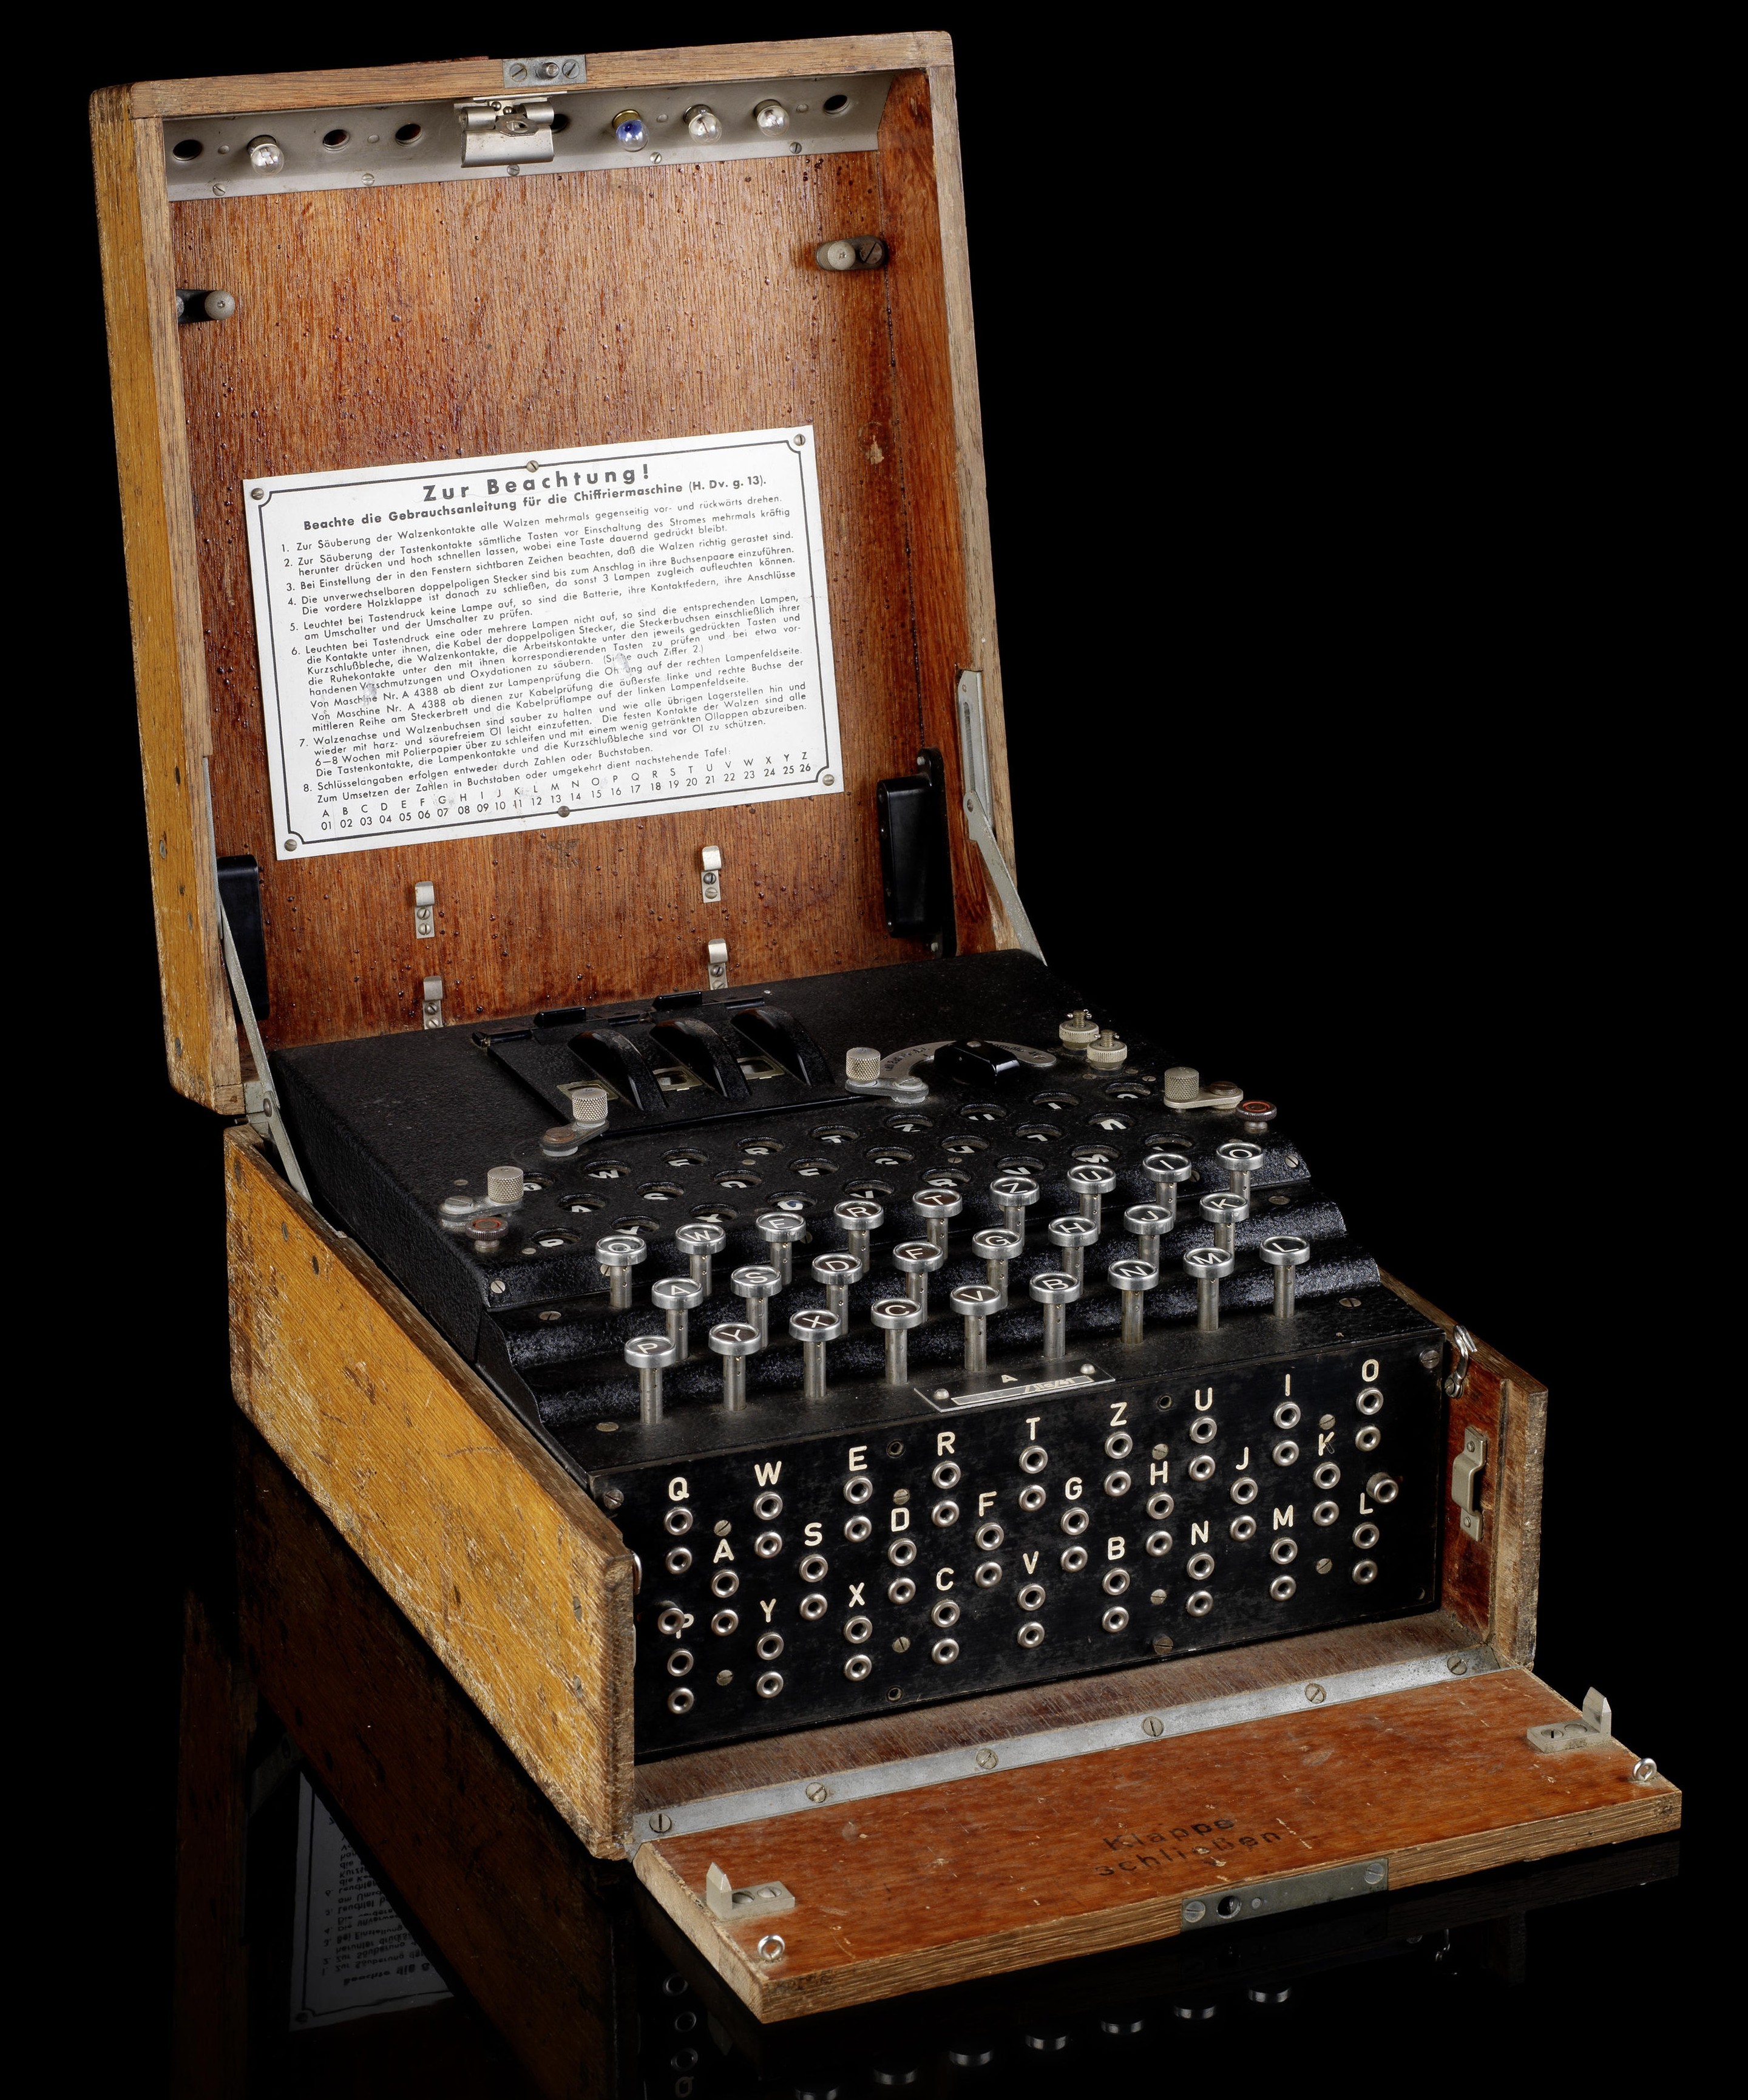 on-this-day-in-1941-the-enigma-key-was-broken-protothemanews